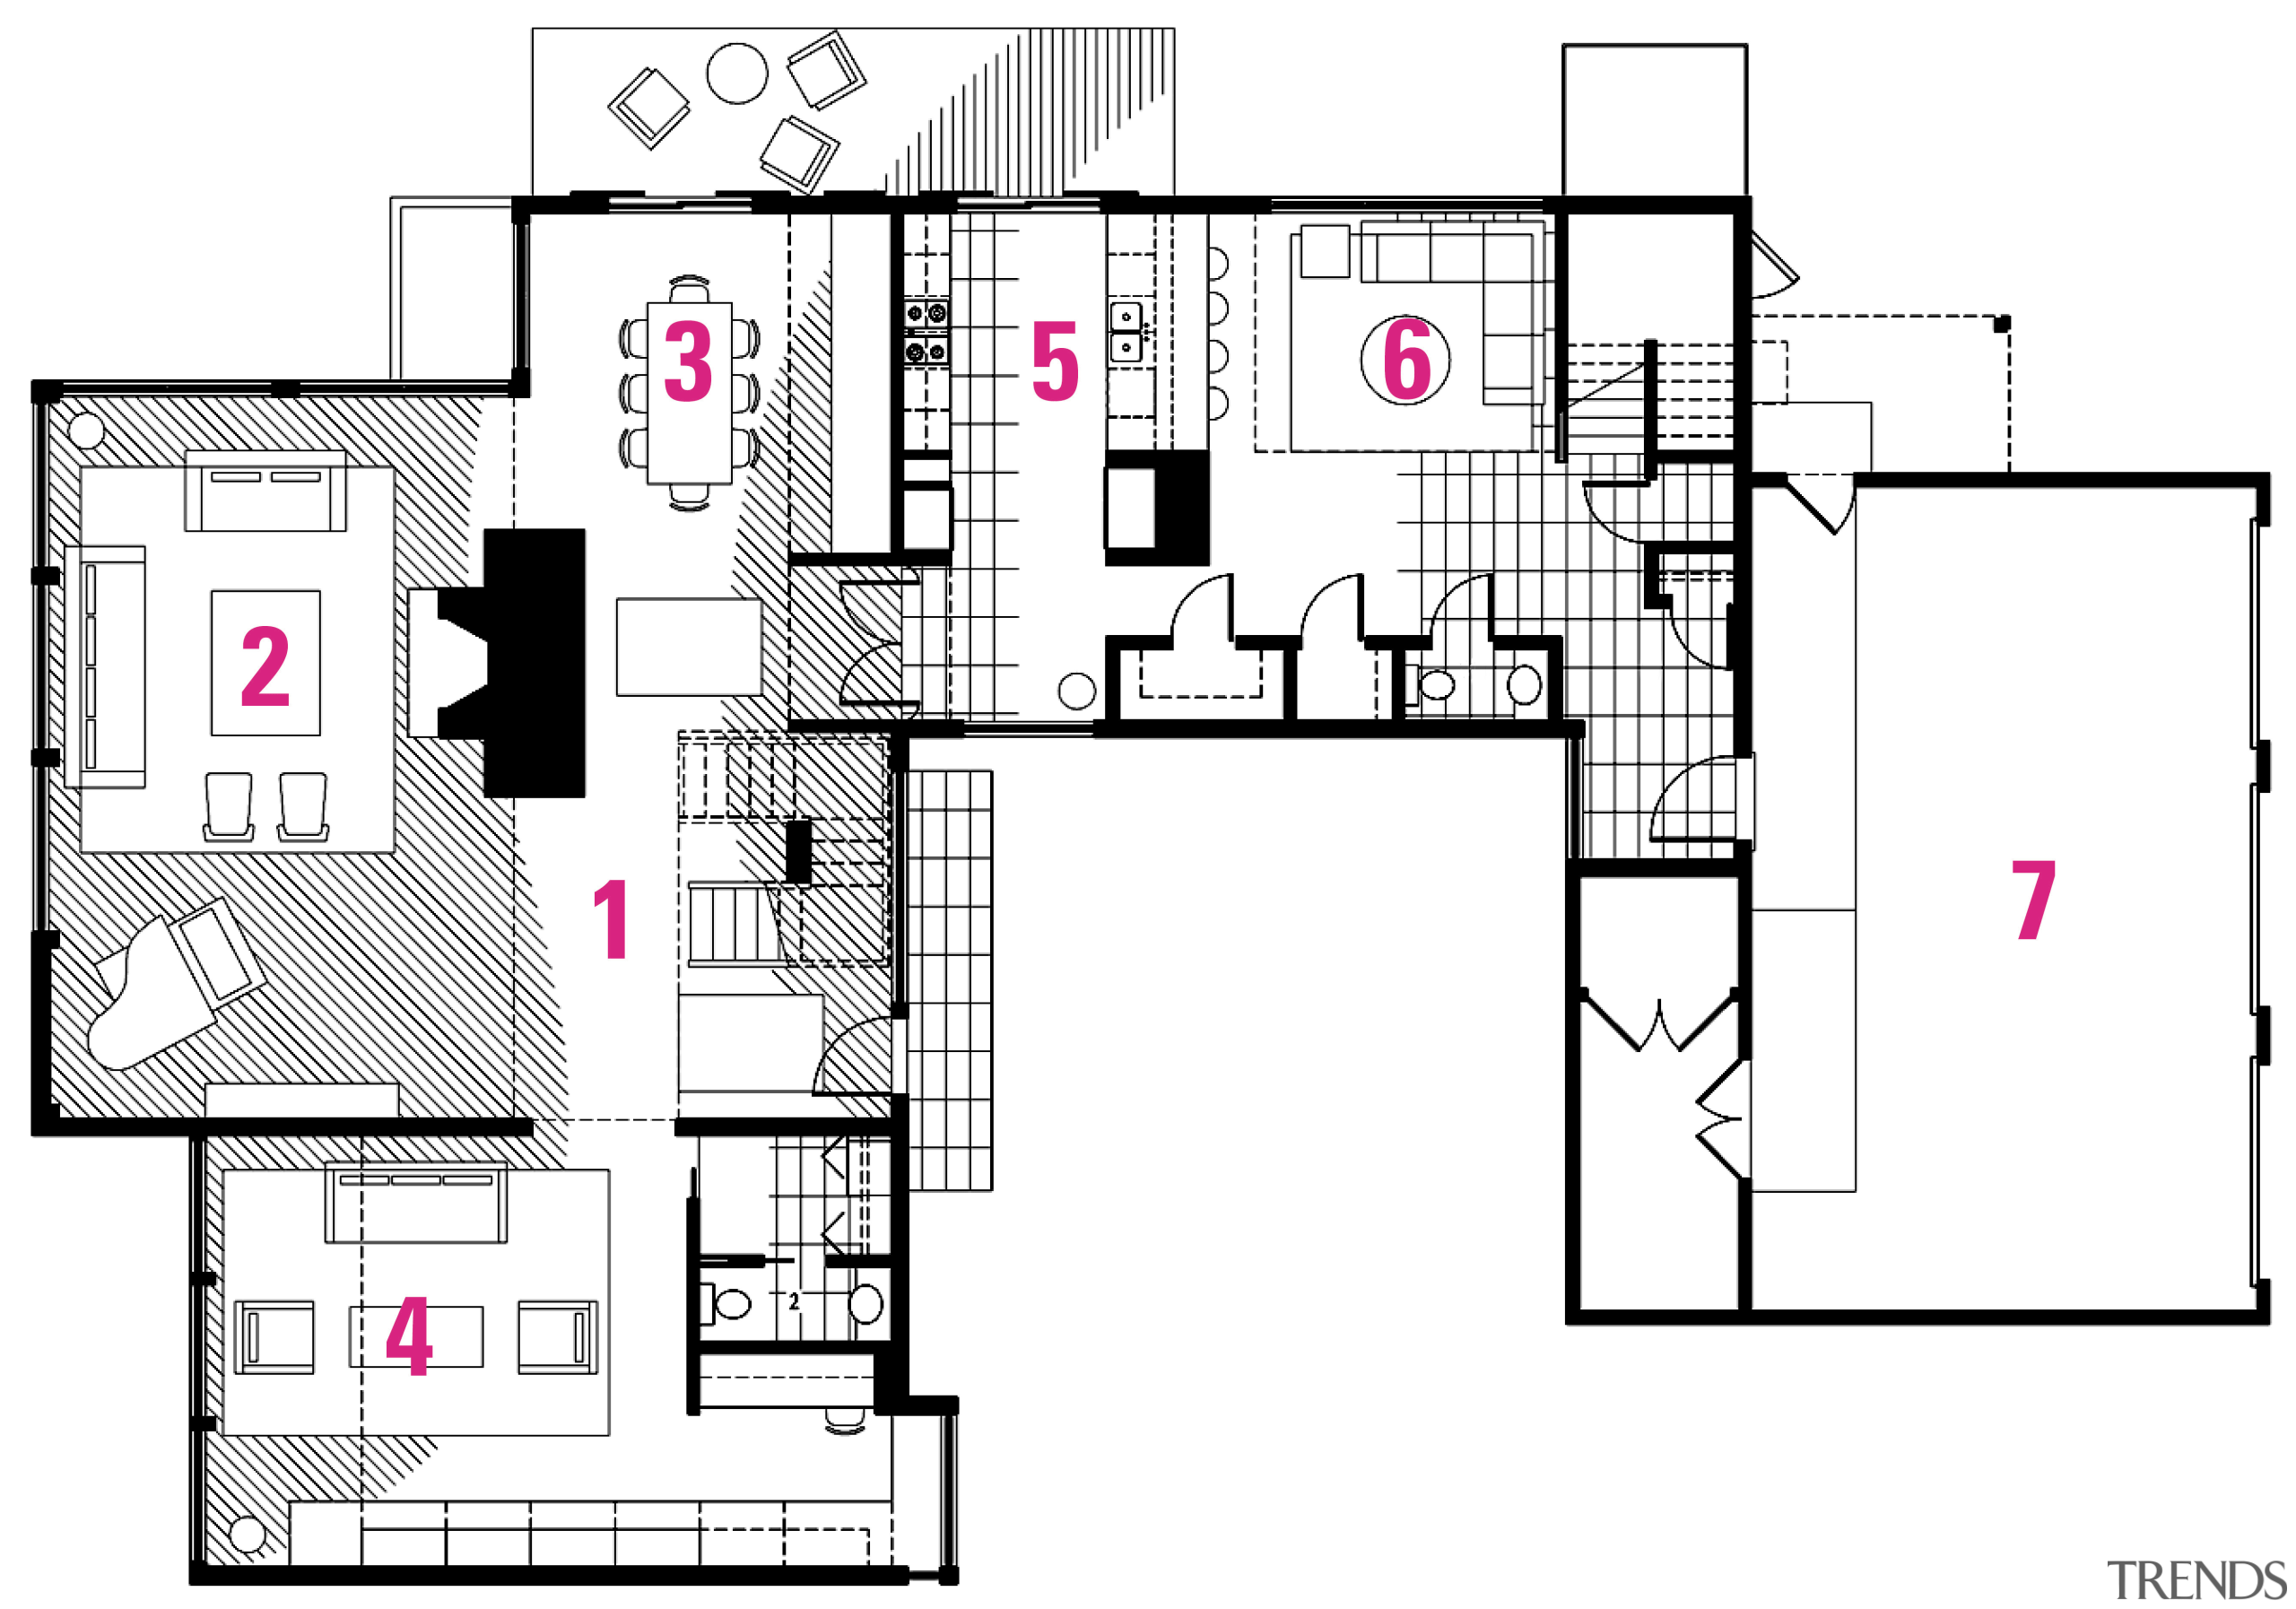 Architectural view of the interior of this home architecture, area, design, diagram, drawing, floor plan, font, line, plan, product, product design, square, structure, text, white